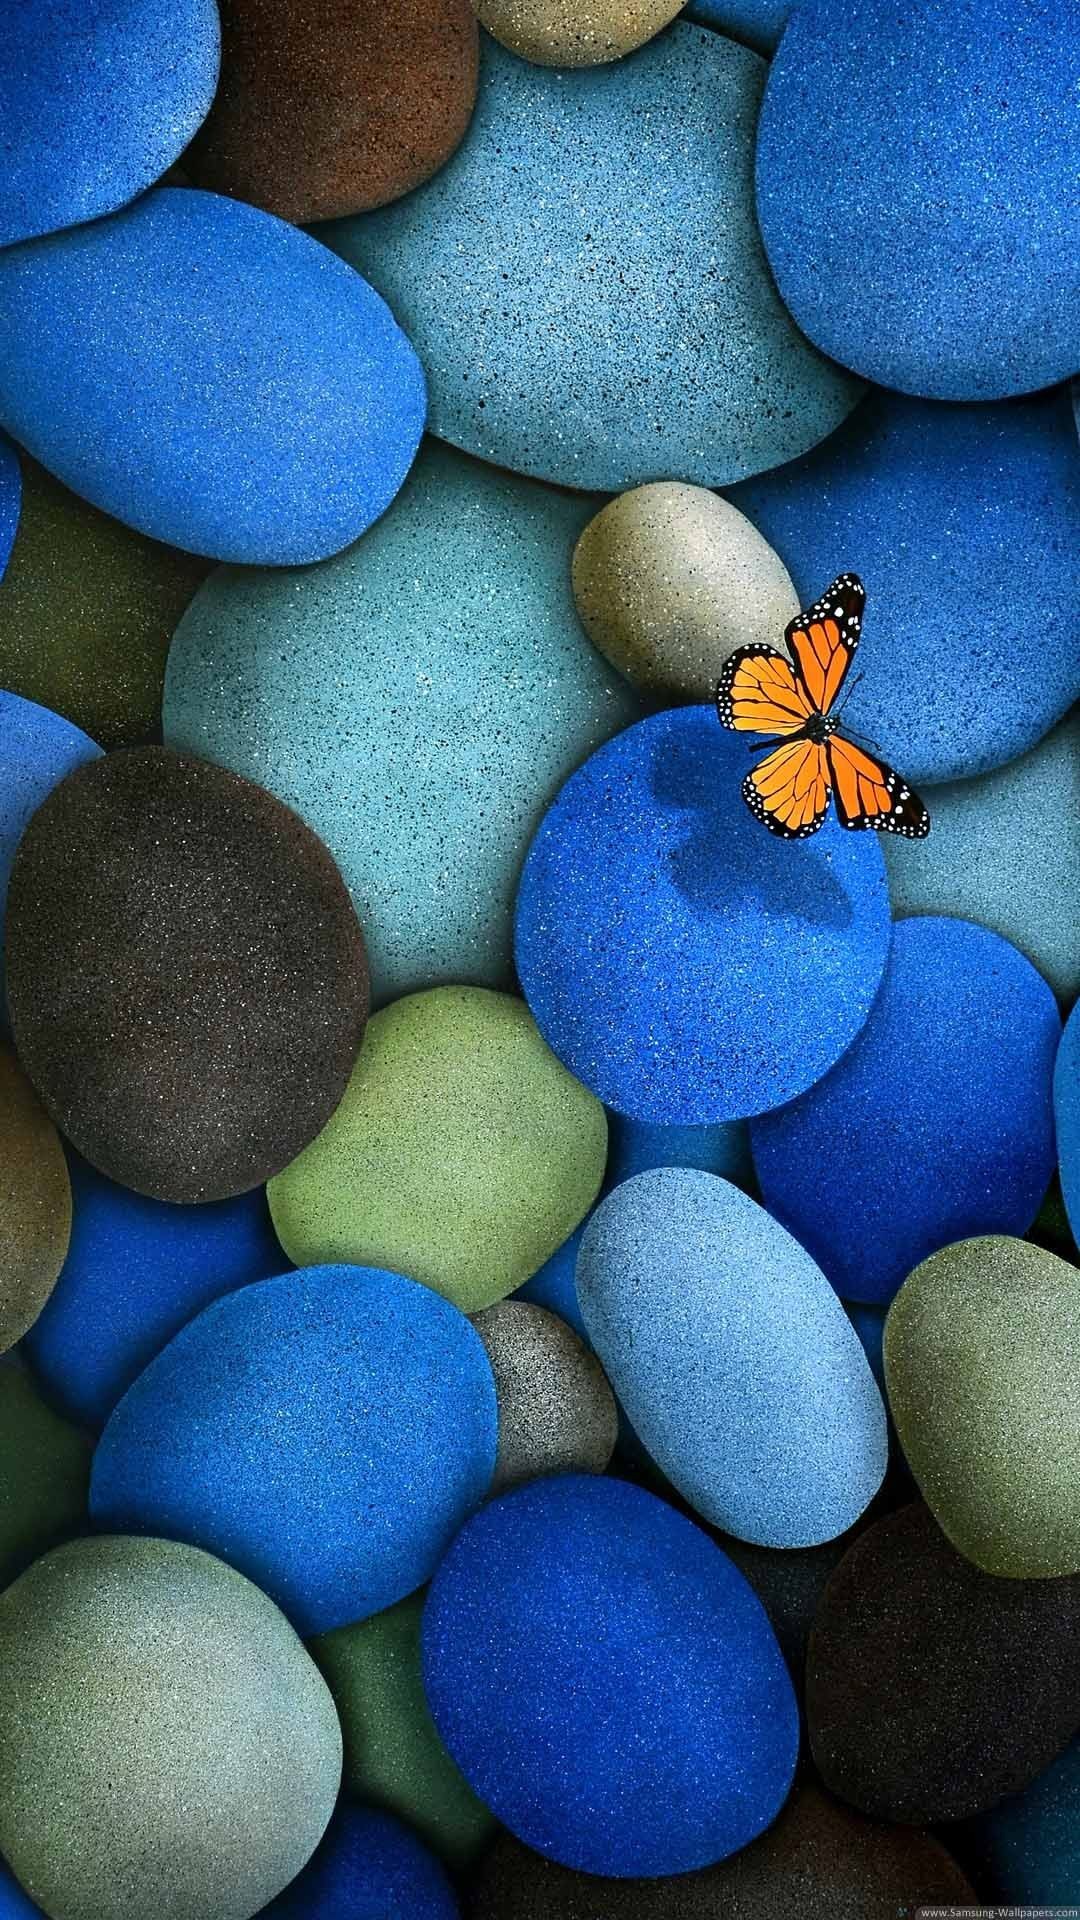 1080x1920 Free background images hd for mobile Download - Colorful Stone Best Hd  Iphone New Wallpapers Background Iphone intended for Free background images  hd for ...